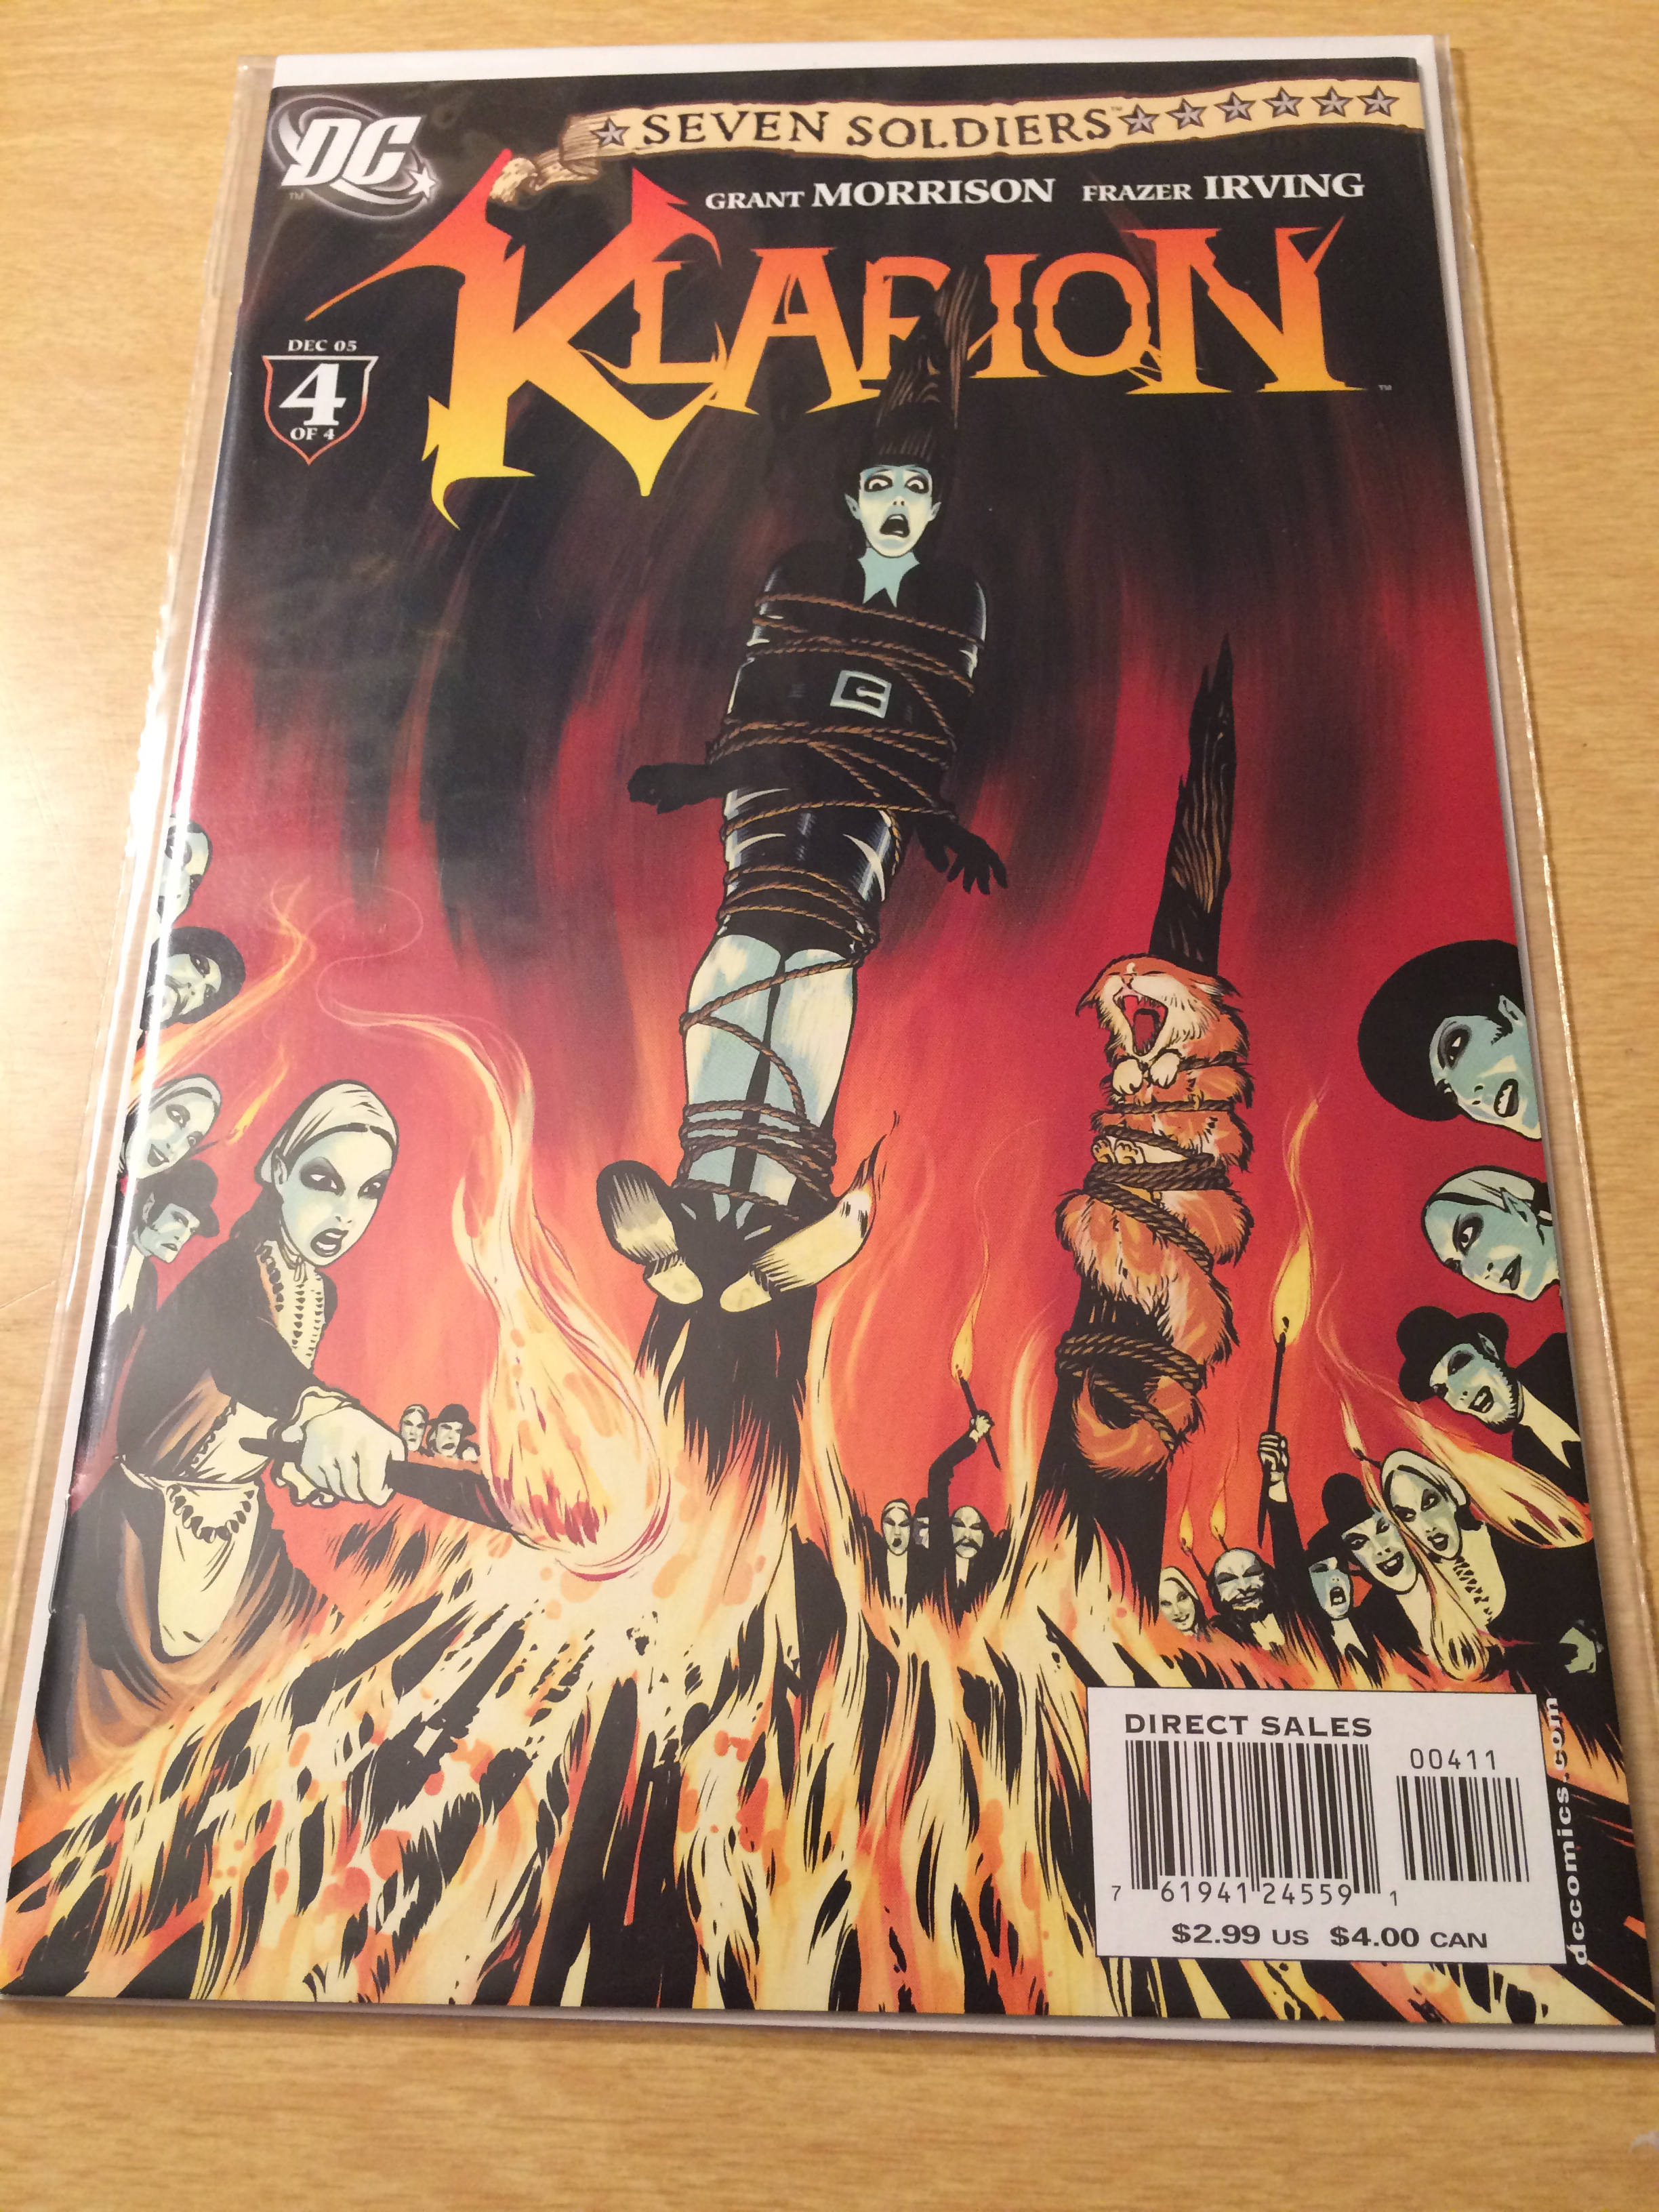 2005 1ST PRINTING DC COMICS KLARION THE WITCHBOY #4 SEVEN SOLDIERS